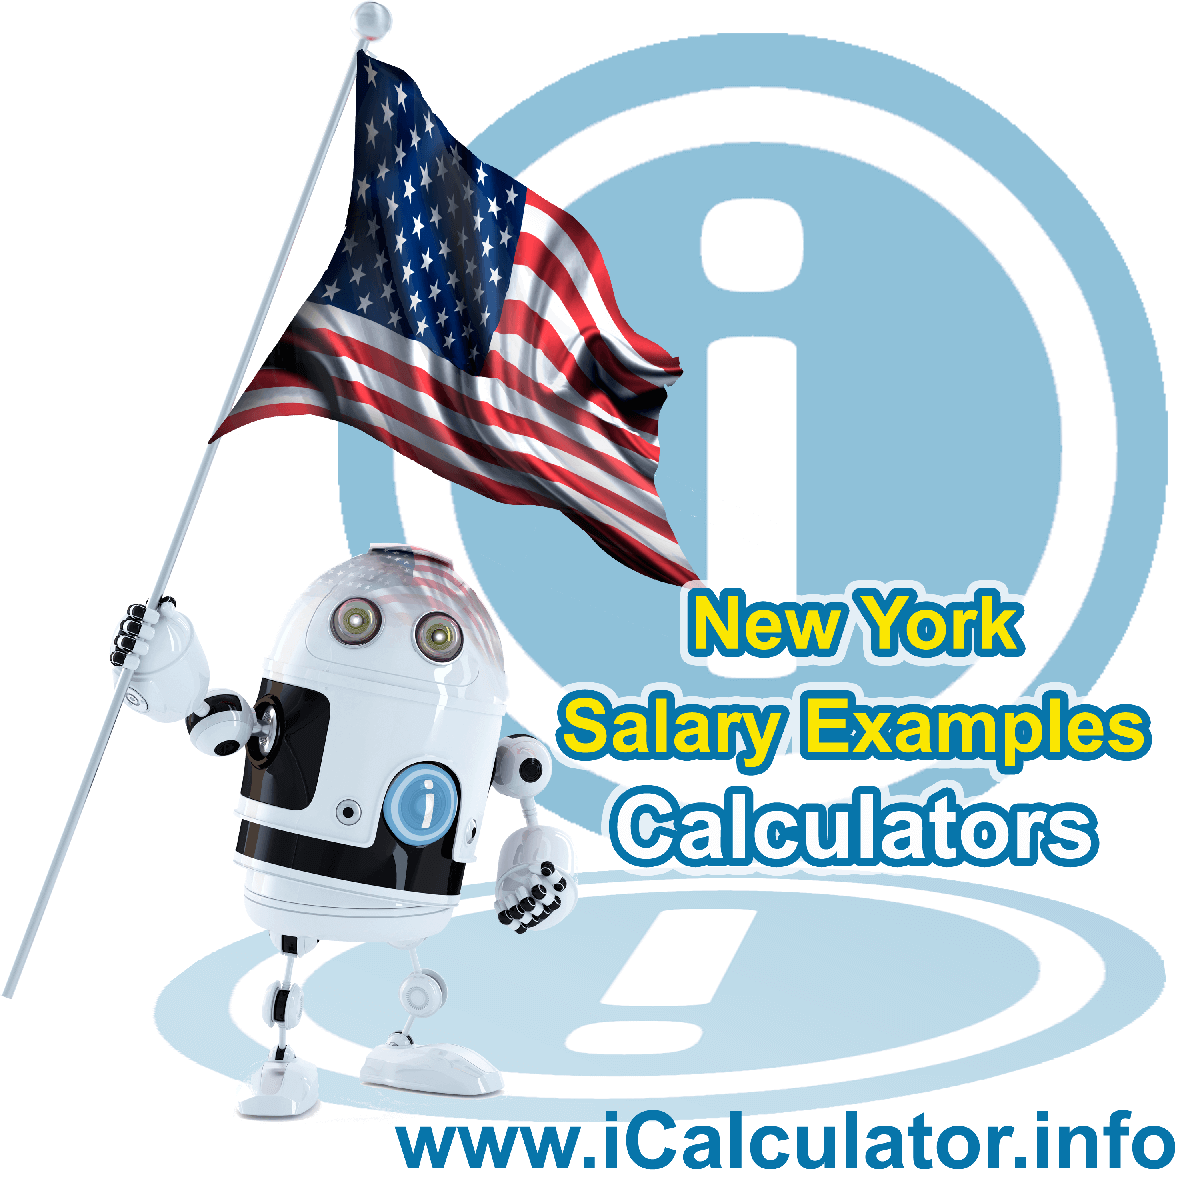 $ 70,000.00 After Tax in New York| iCalculator™ | $ 70,000.00 salary after tax example for 2023 tax year in New York. Federal and New York State income tax plus social security deductions and personal tax exemptions and tax allowances for 2023 